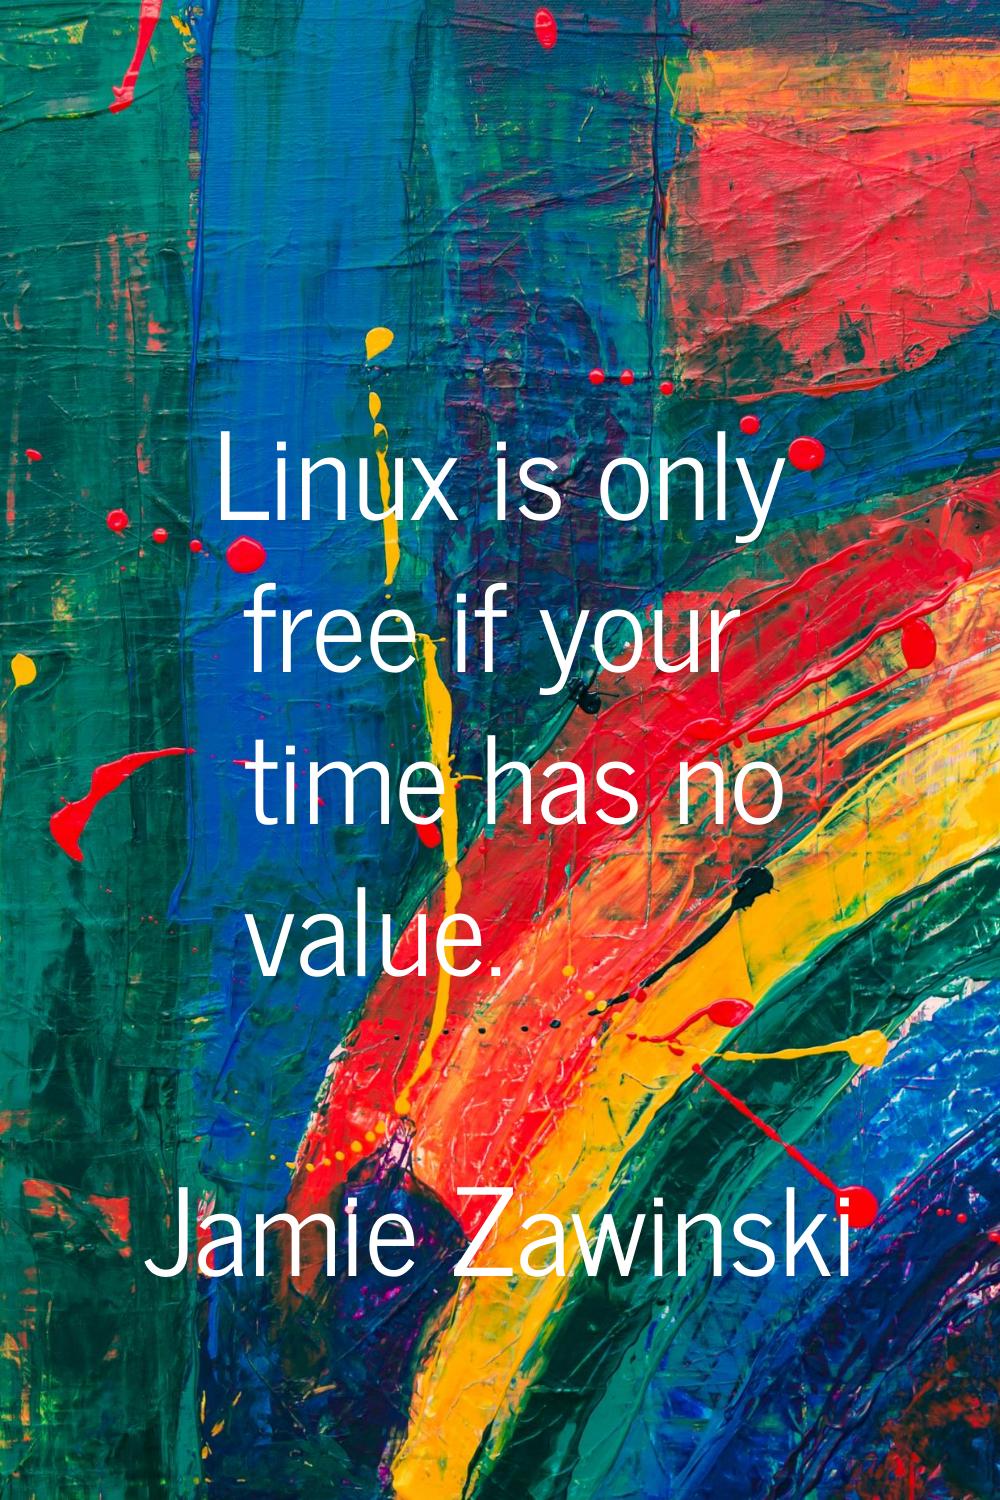 Linux is only free if your time has no value.